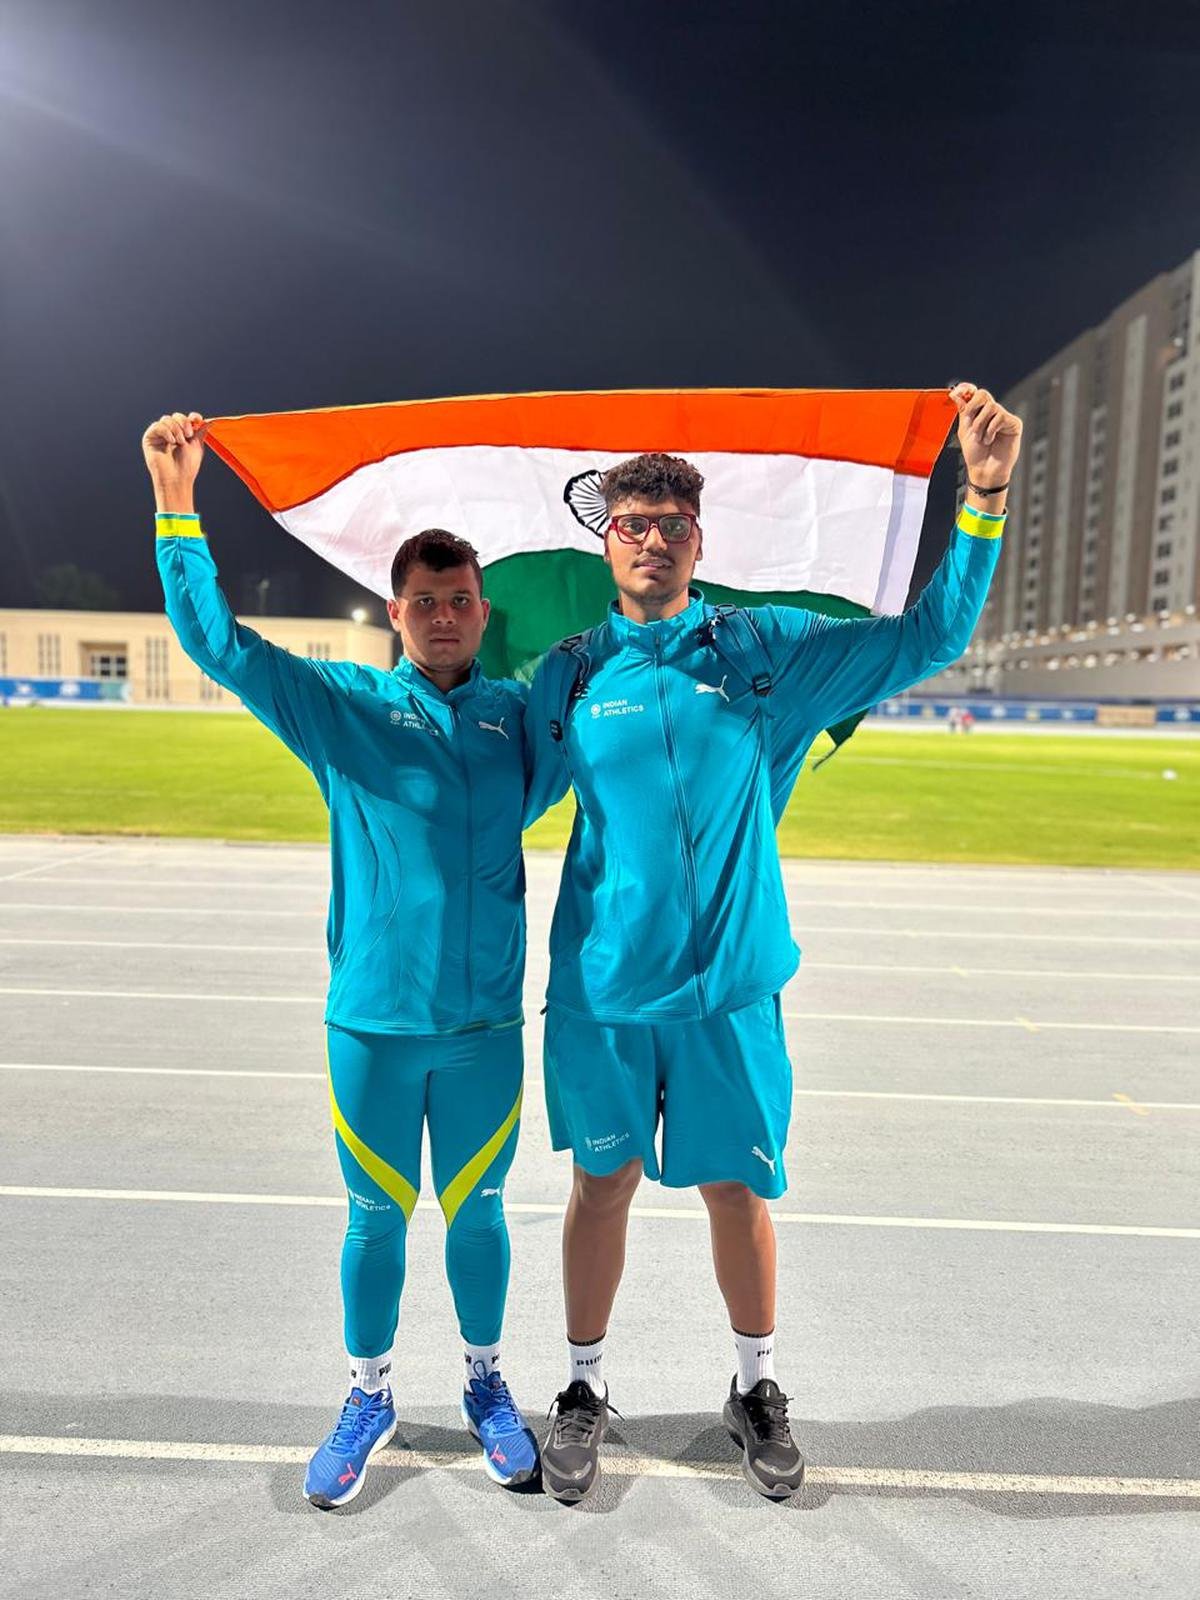 Harshit won the men’s hammer throw gold while his teammate Prateek took the bronze. 